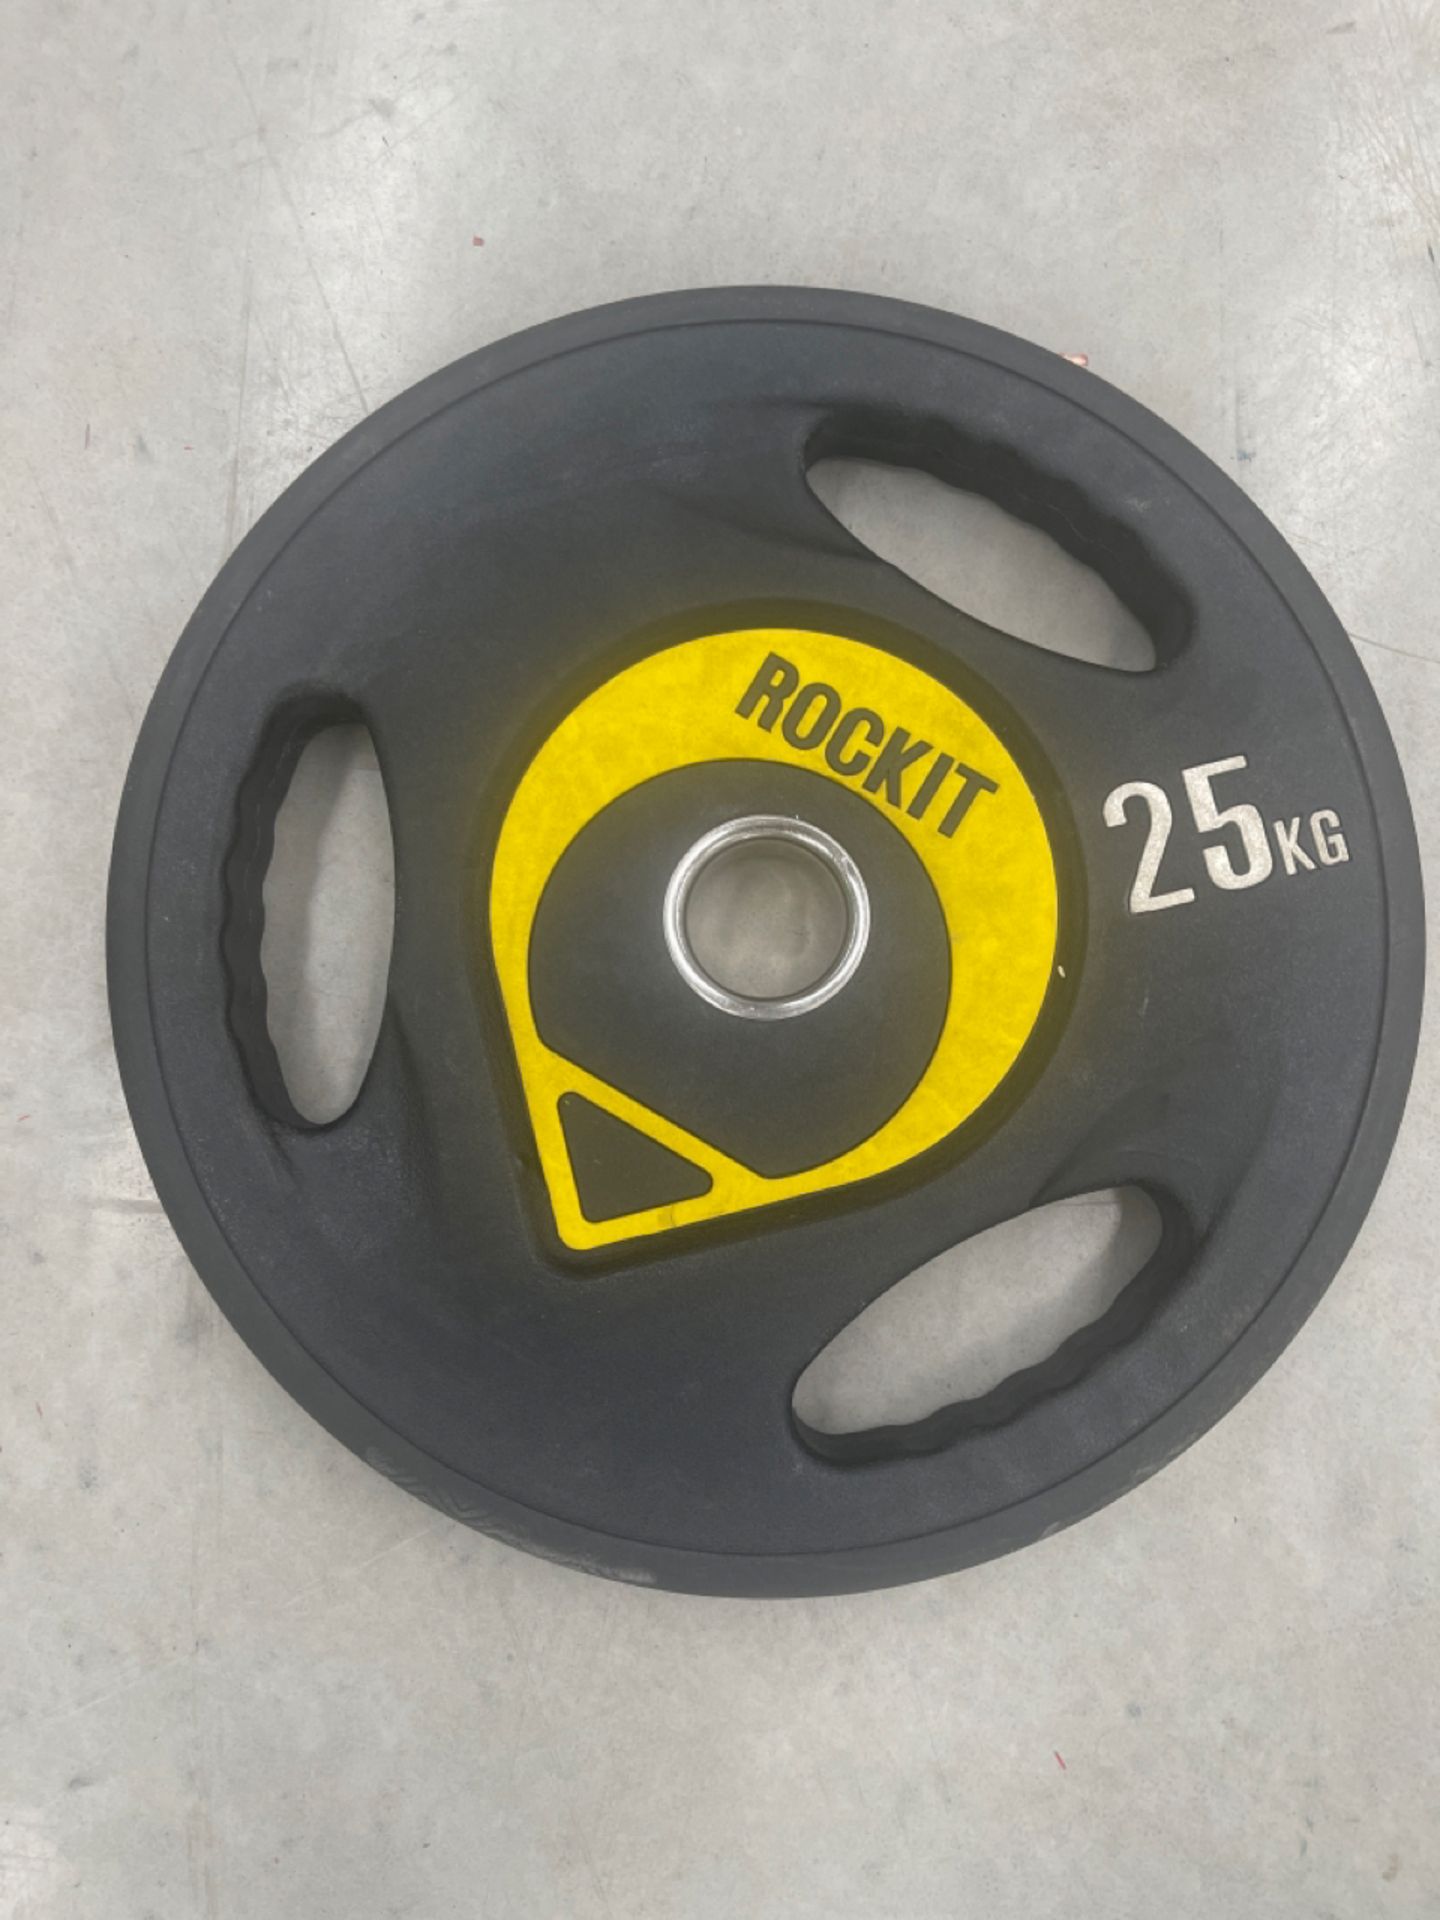 Rockit Weight Plates 2.5kg x2 - Image 2 of 2